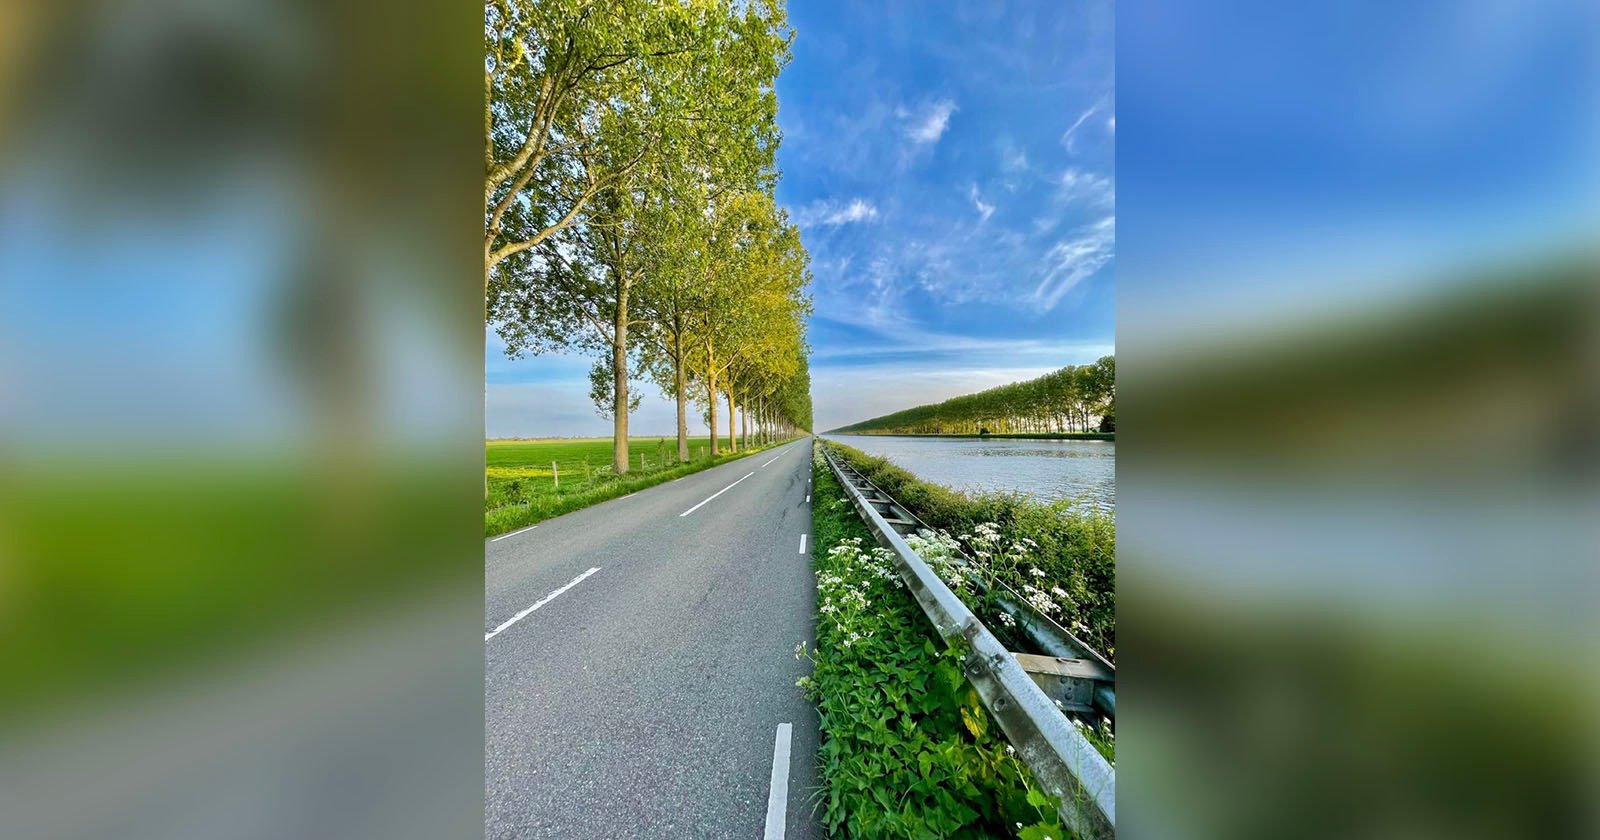 A scenic road runs alongside a canal, bordered by tall trees on the left and a guardrail with wildflowers on the right. The sky above is bright blue with scattered clouds, creating a serene and inviting atmosphere.